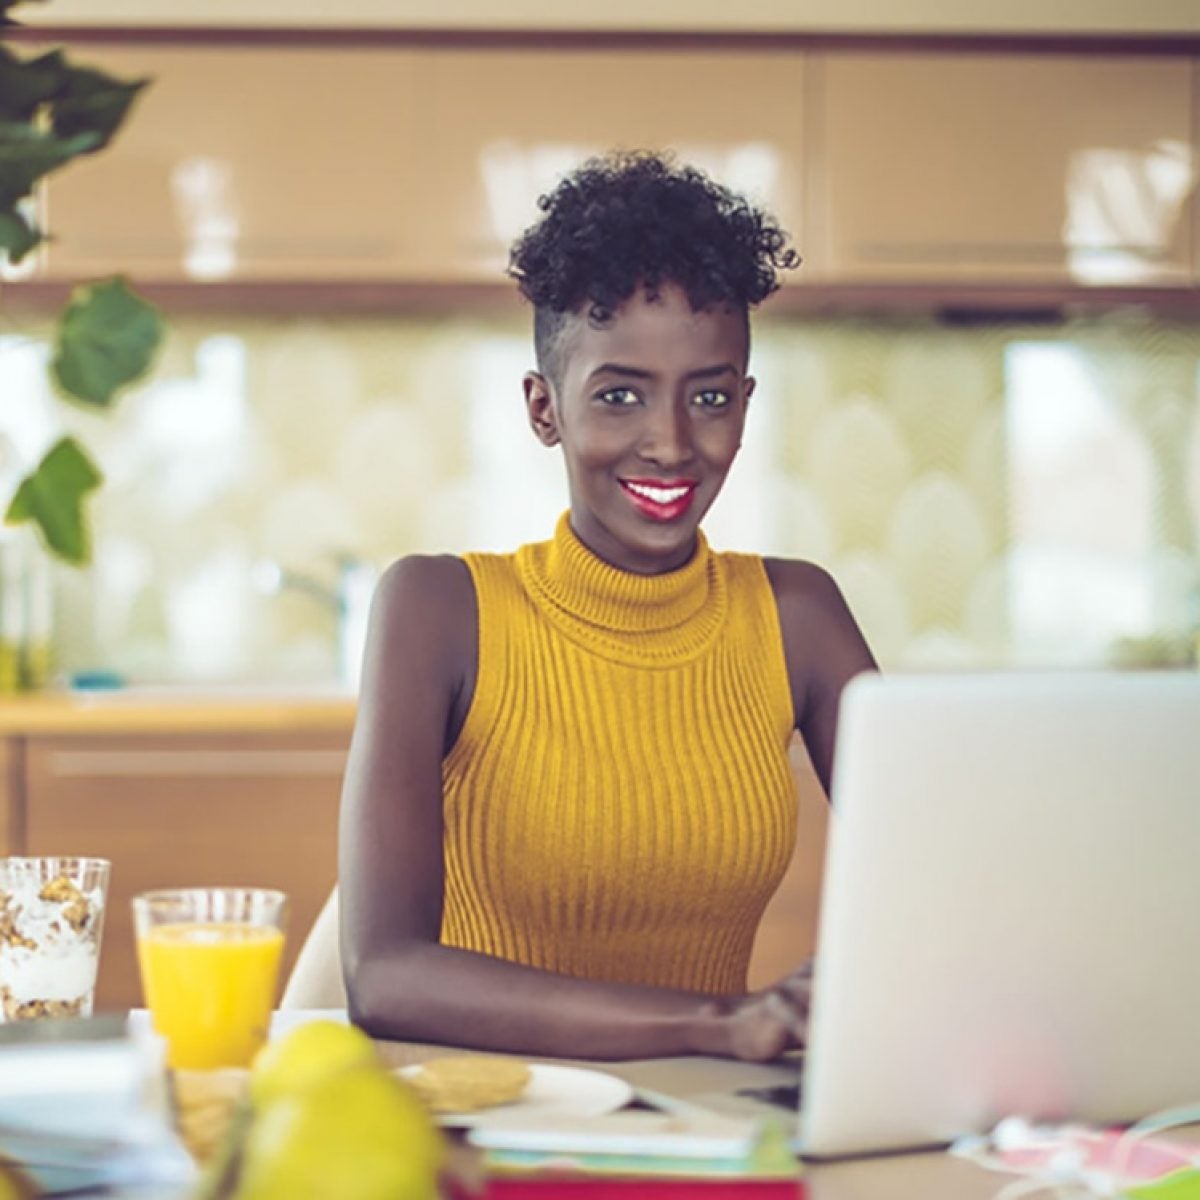 Pine-Sol & ESSENCE Team Up To Support Black Woman Entrepreneurs With The “Build Your Legacy” Program